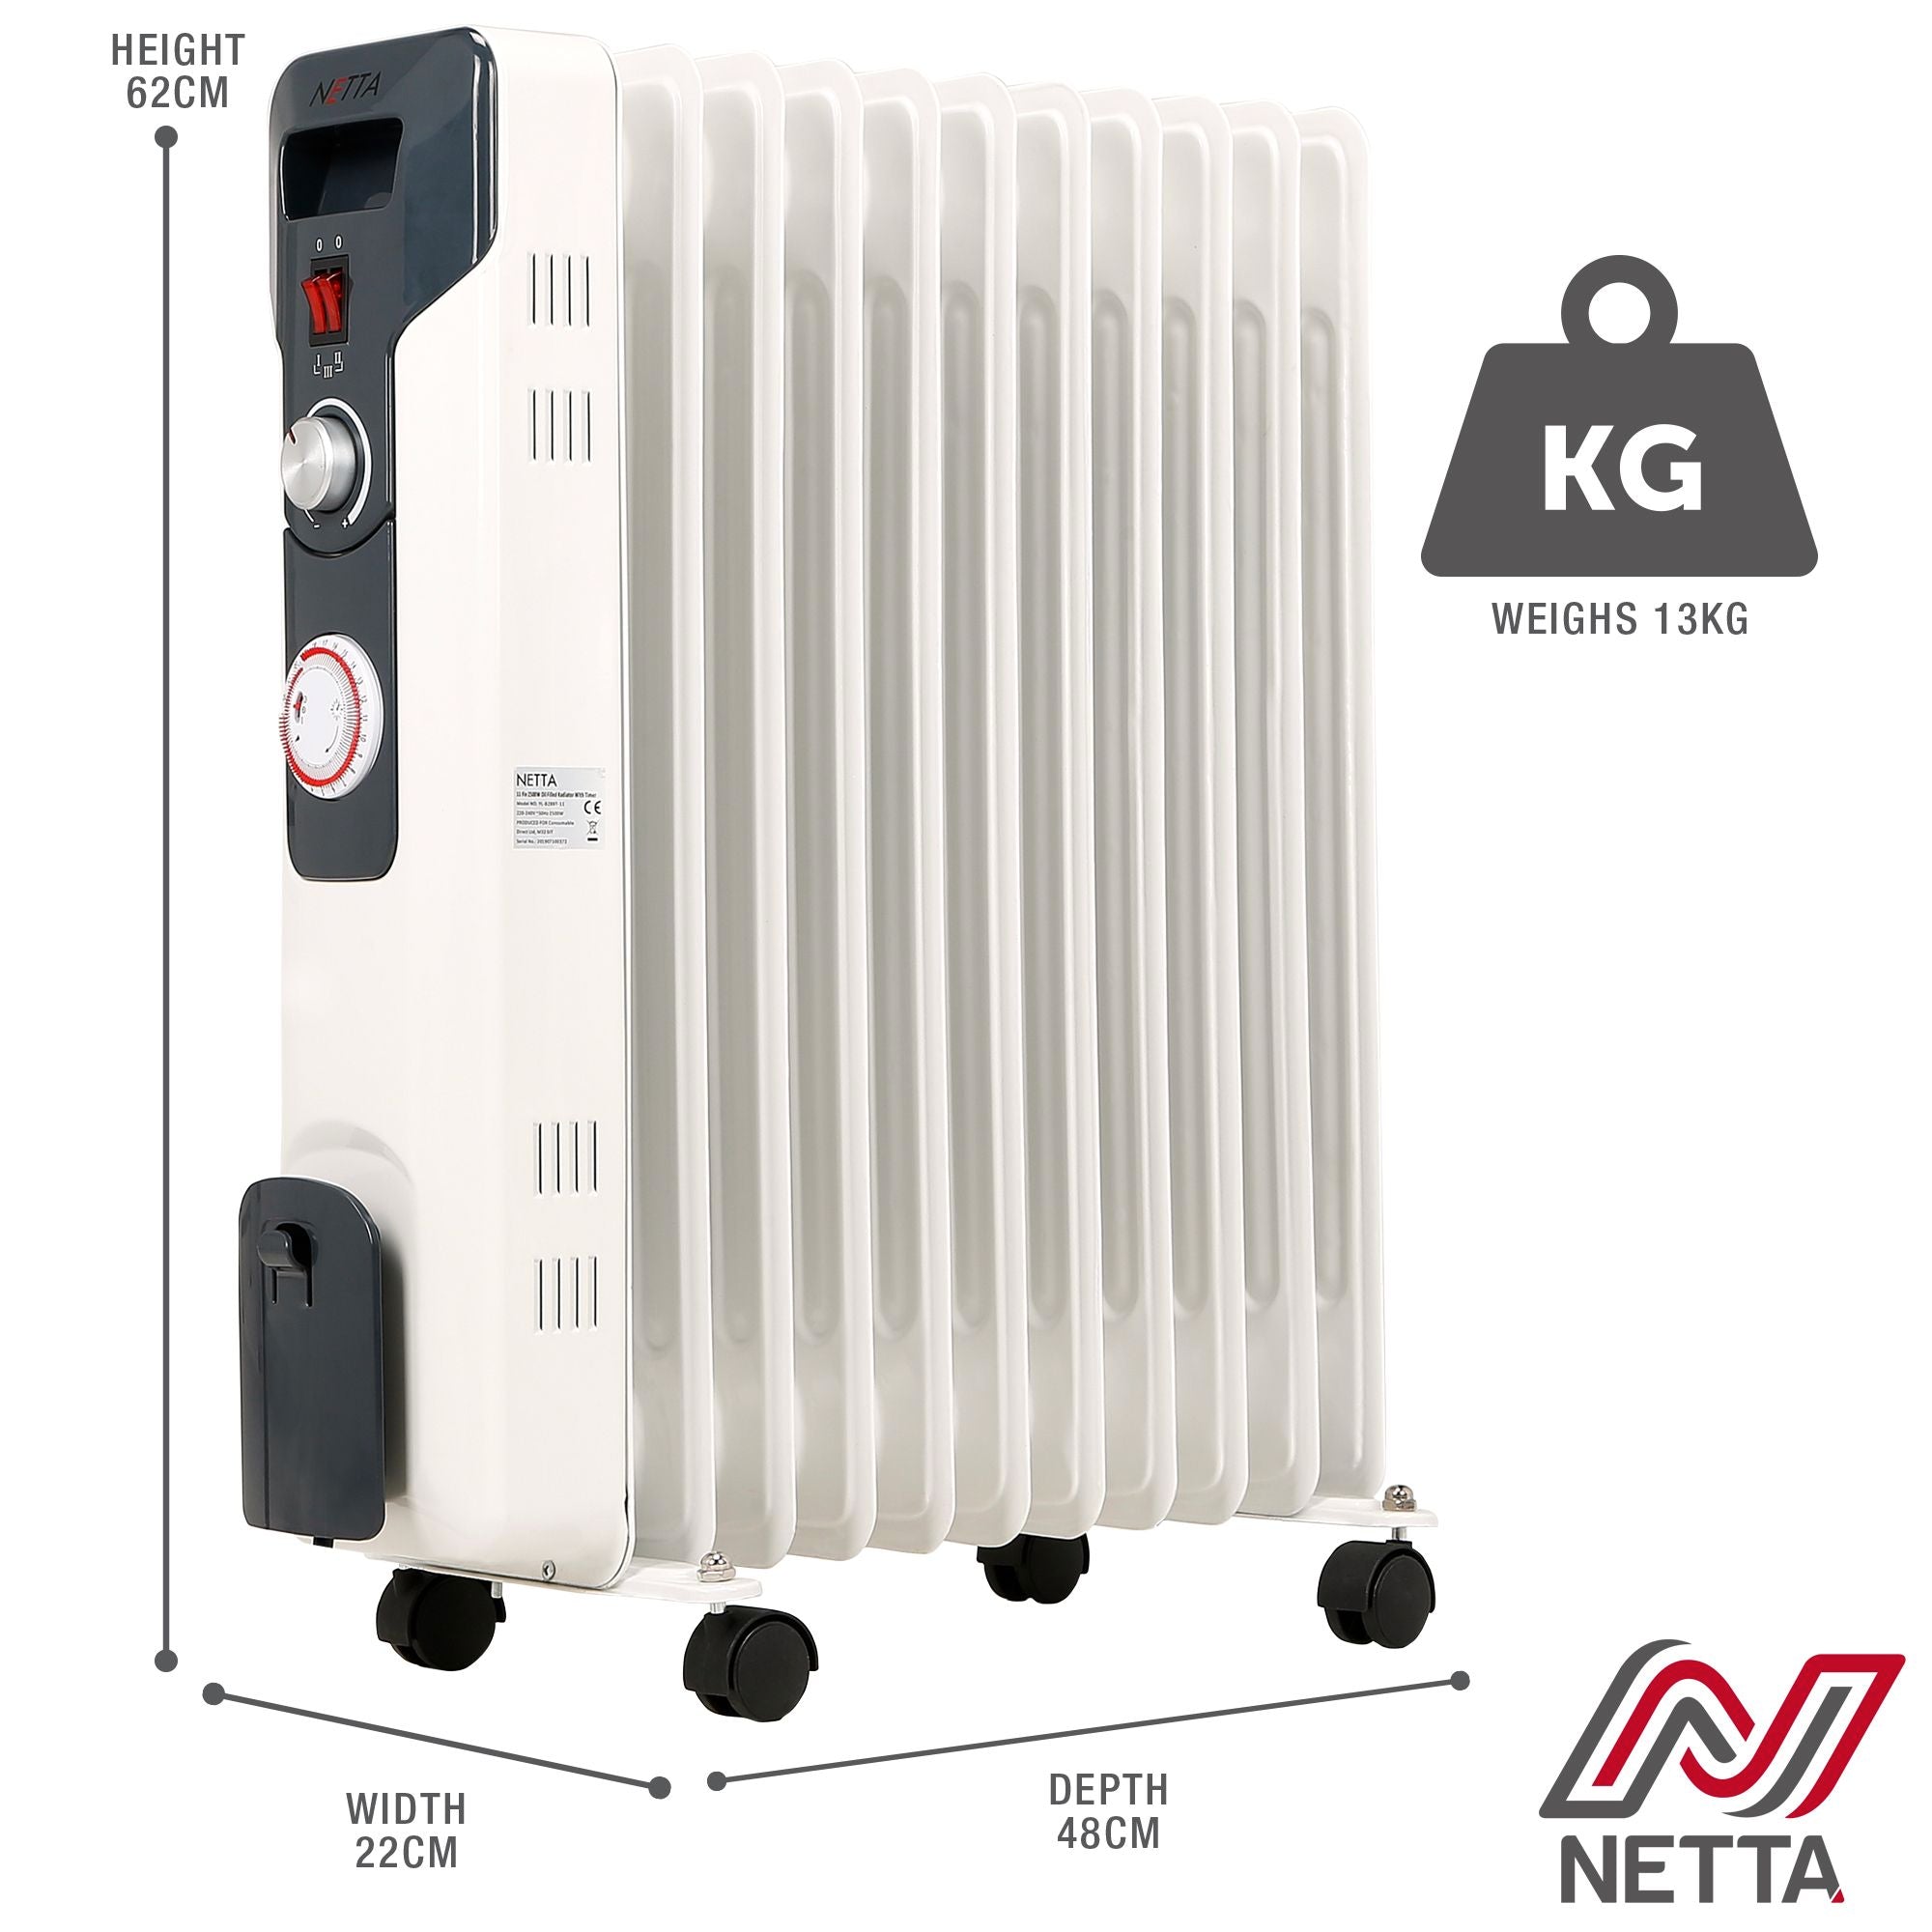 2500W 11 Fin Oil Filled Radiator With Timer - White